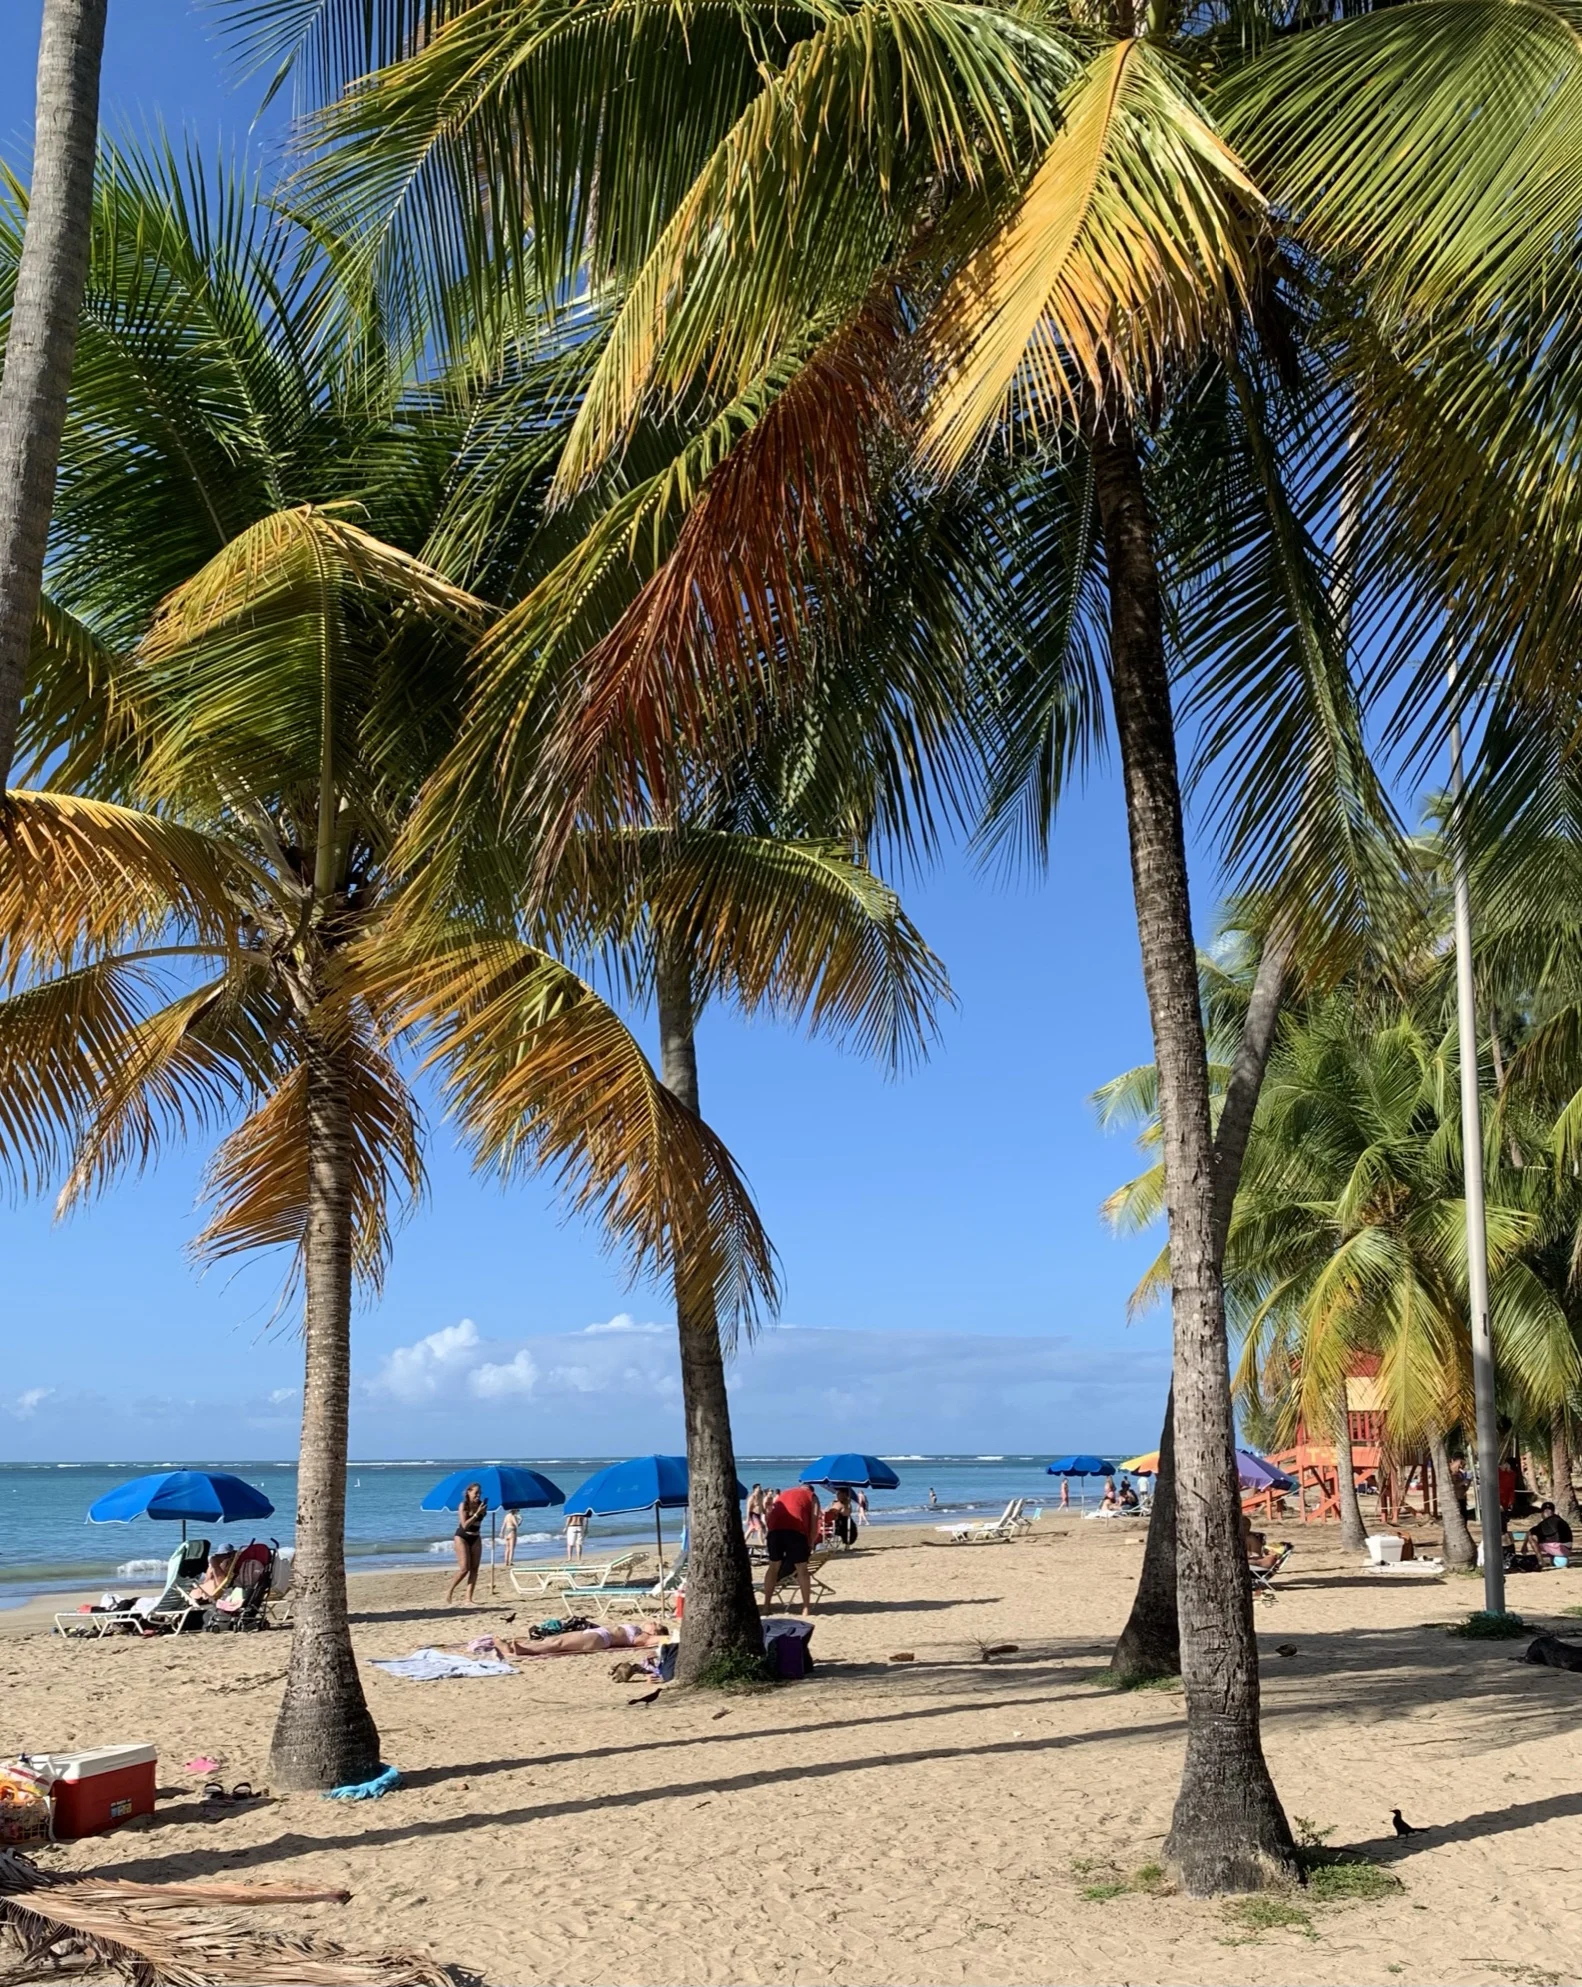 luquillo beach with palm trees 4 days in puerto rico